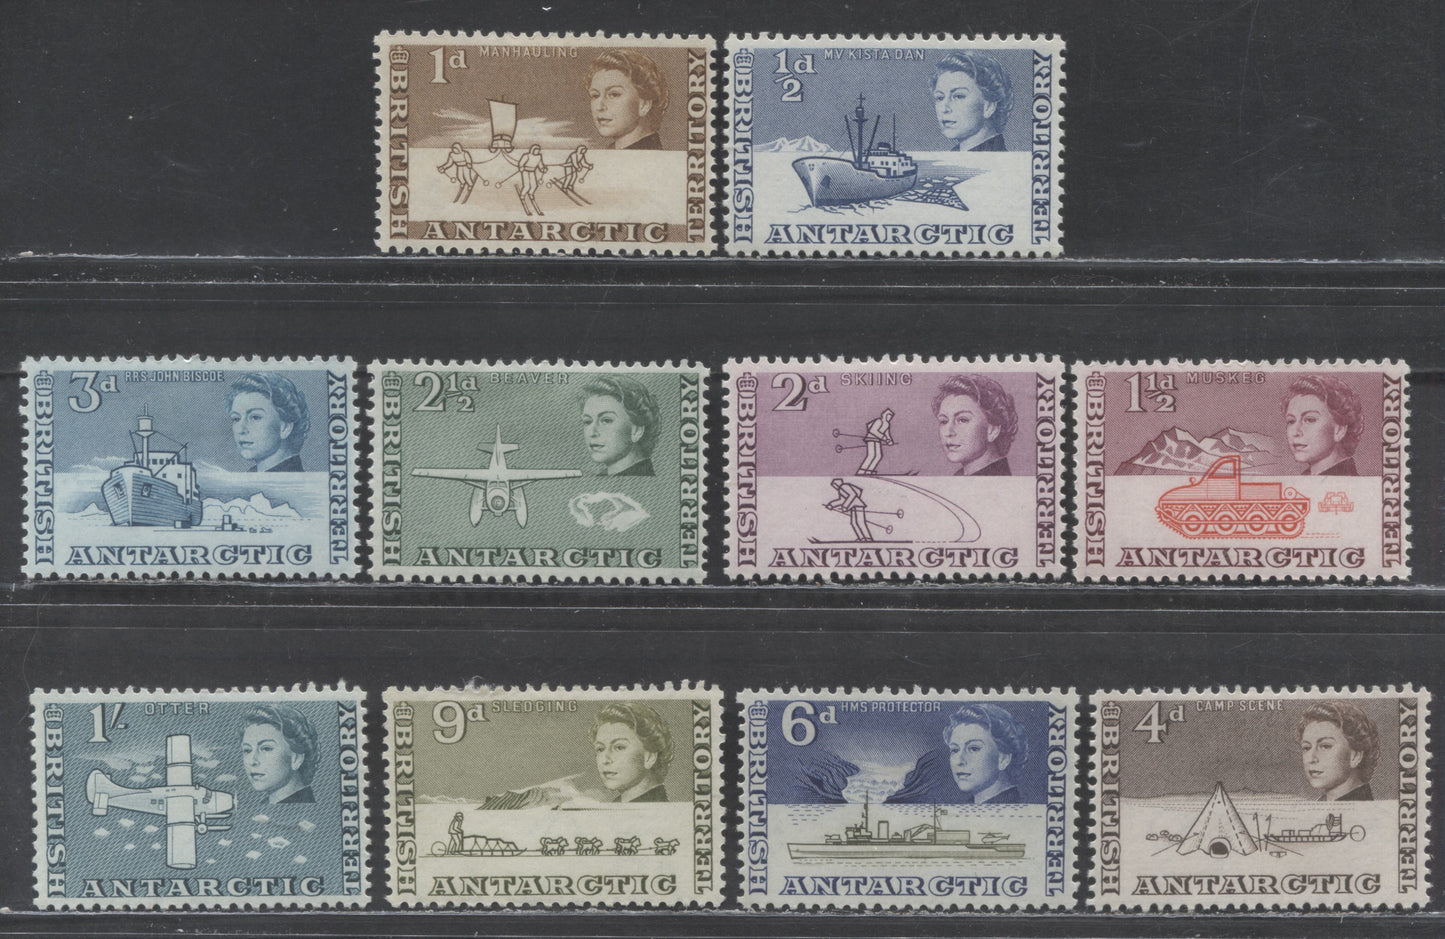 Lot 428 British Antarctic Territory SC#1-10 1963 Definitives, 10 VFOG Singles, Click on Listing to See ALL Pictures, 2017 Scott Cat. $25.55 USD